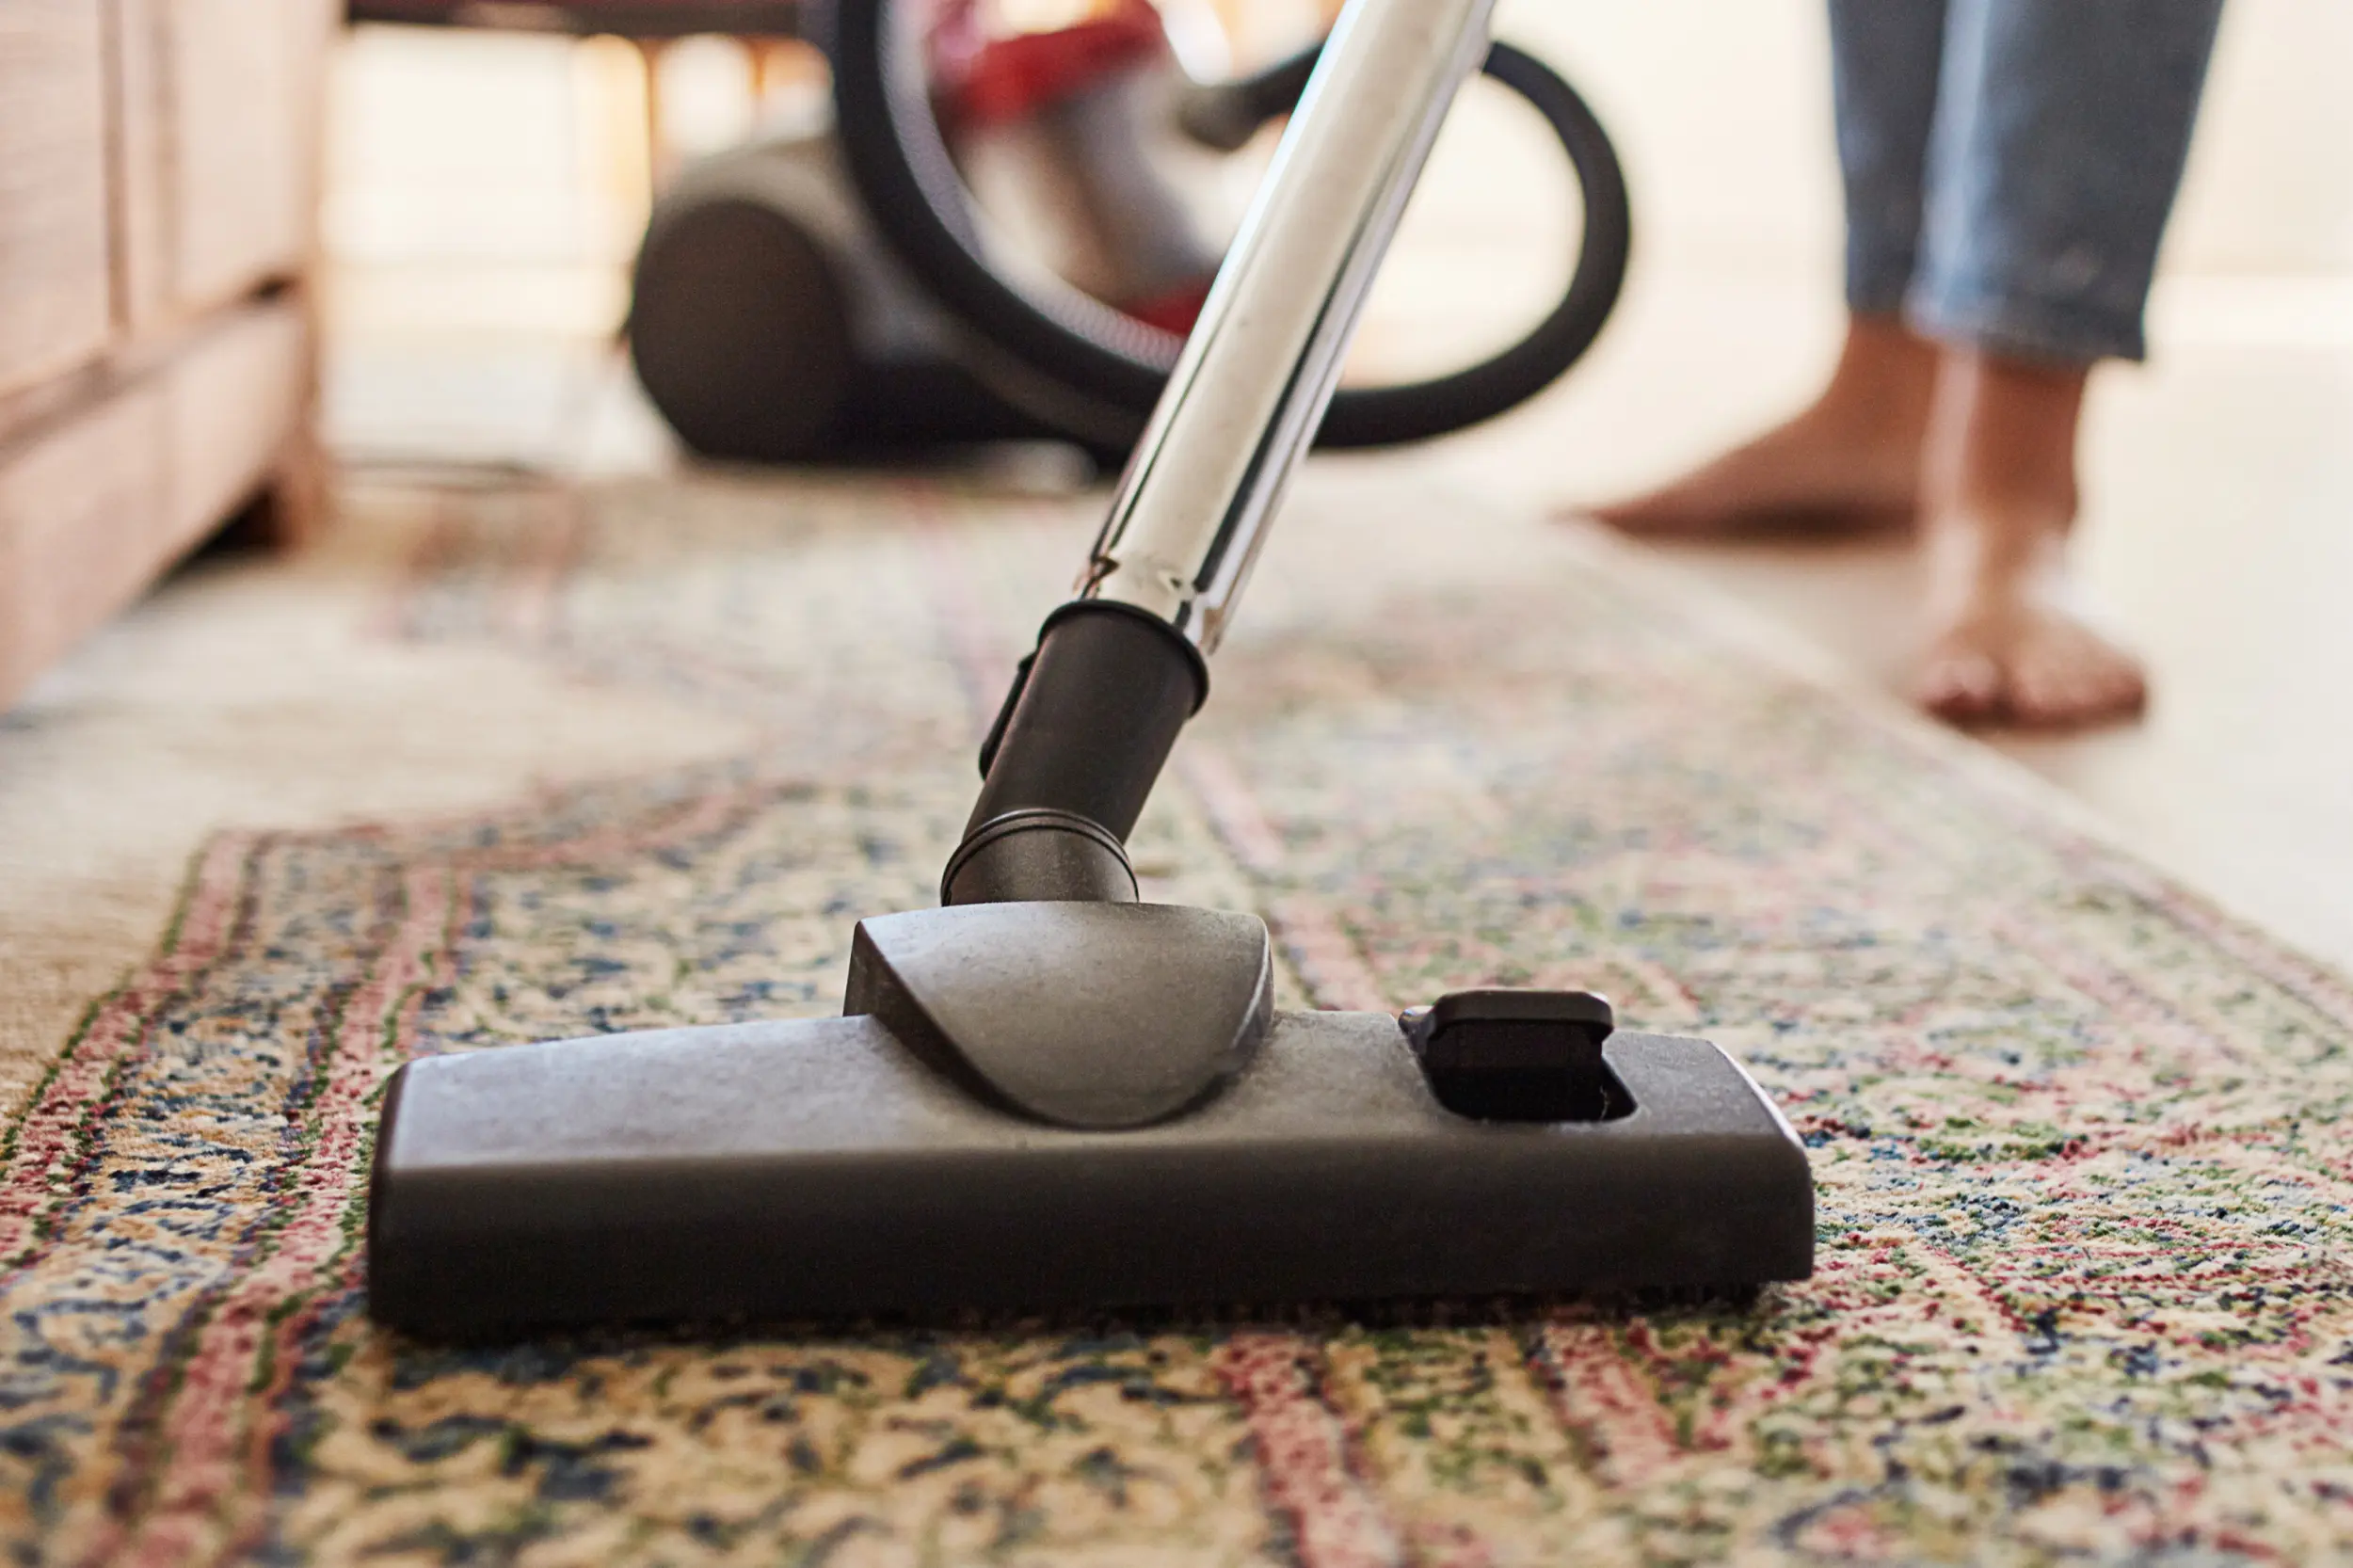 An image of someone steam cleaning their home carpets and rugs